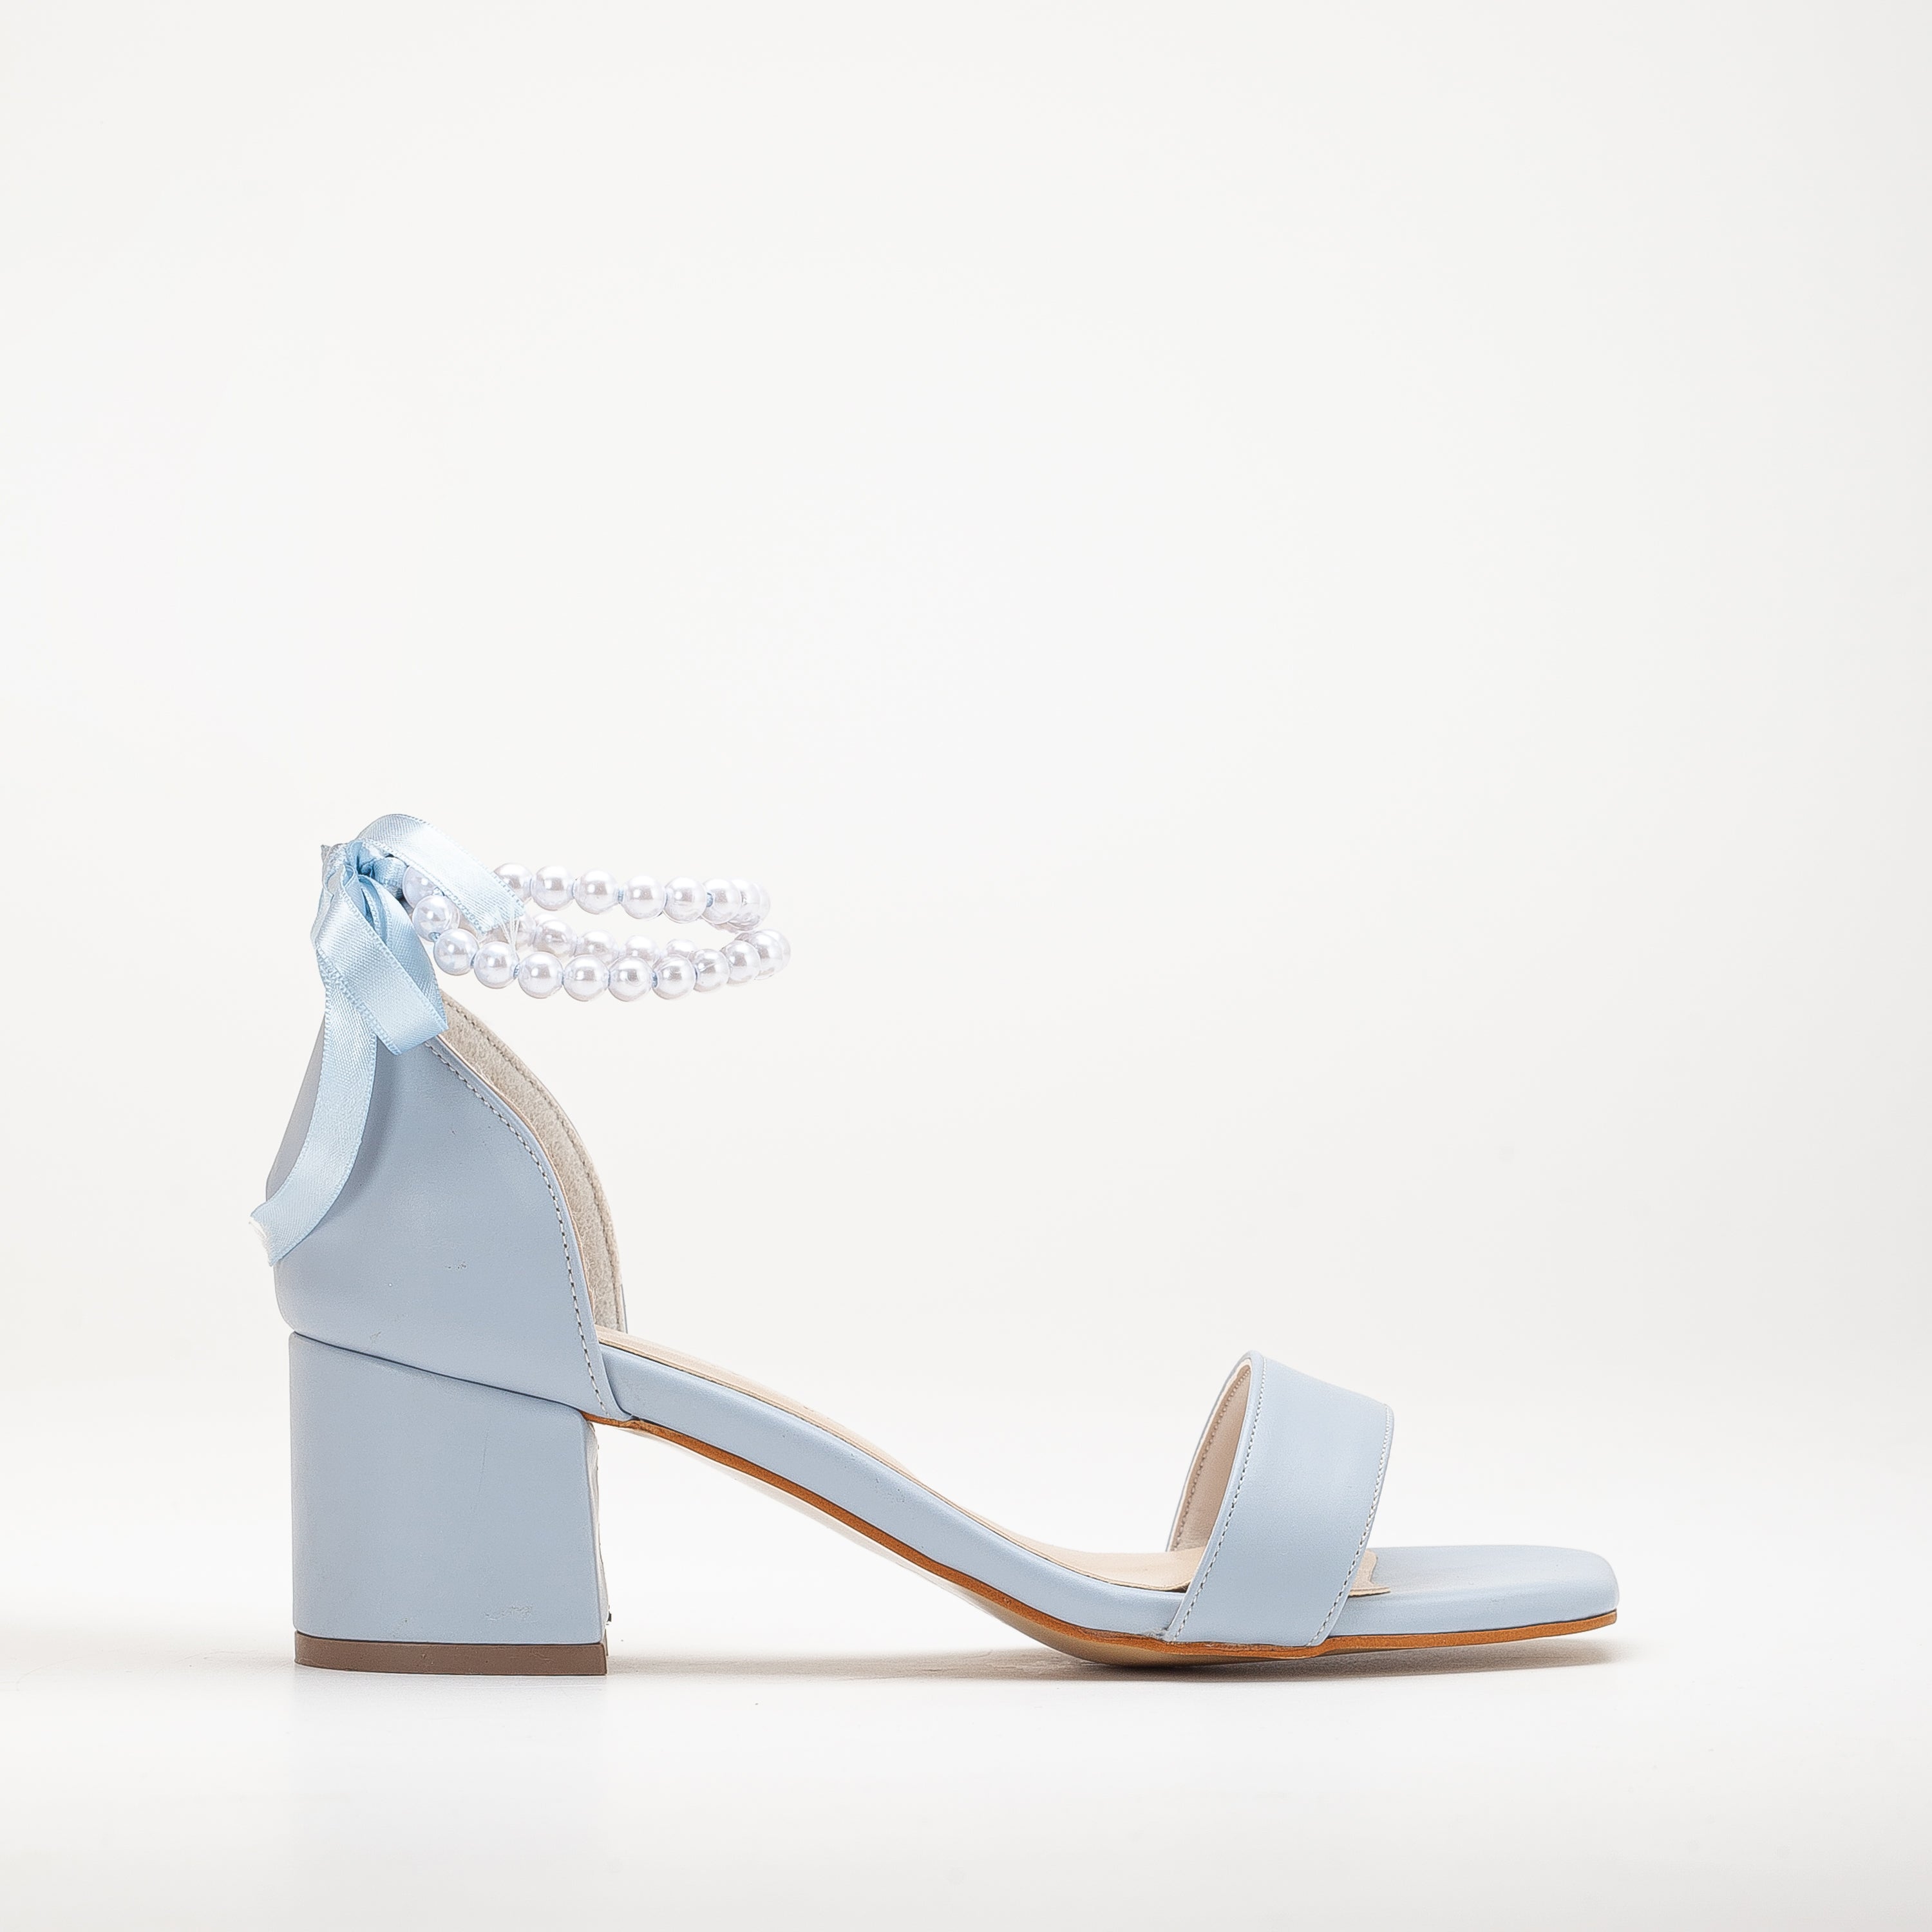 baby blue sandals with pearls on the ankle, pearl ankle strap baby blue sandals, baby blue pearl embellished sandals, baby blue sandals with ankle pearls, pearl decorated baby blue ankle sandals, baby blue sandals with pearl ankle strap, baby blue pearl ankle sandals, baby blue pearl studded ankle sandals, baby blue sandals pearl ankle detail, pearl ankle baby blue dress sandals